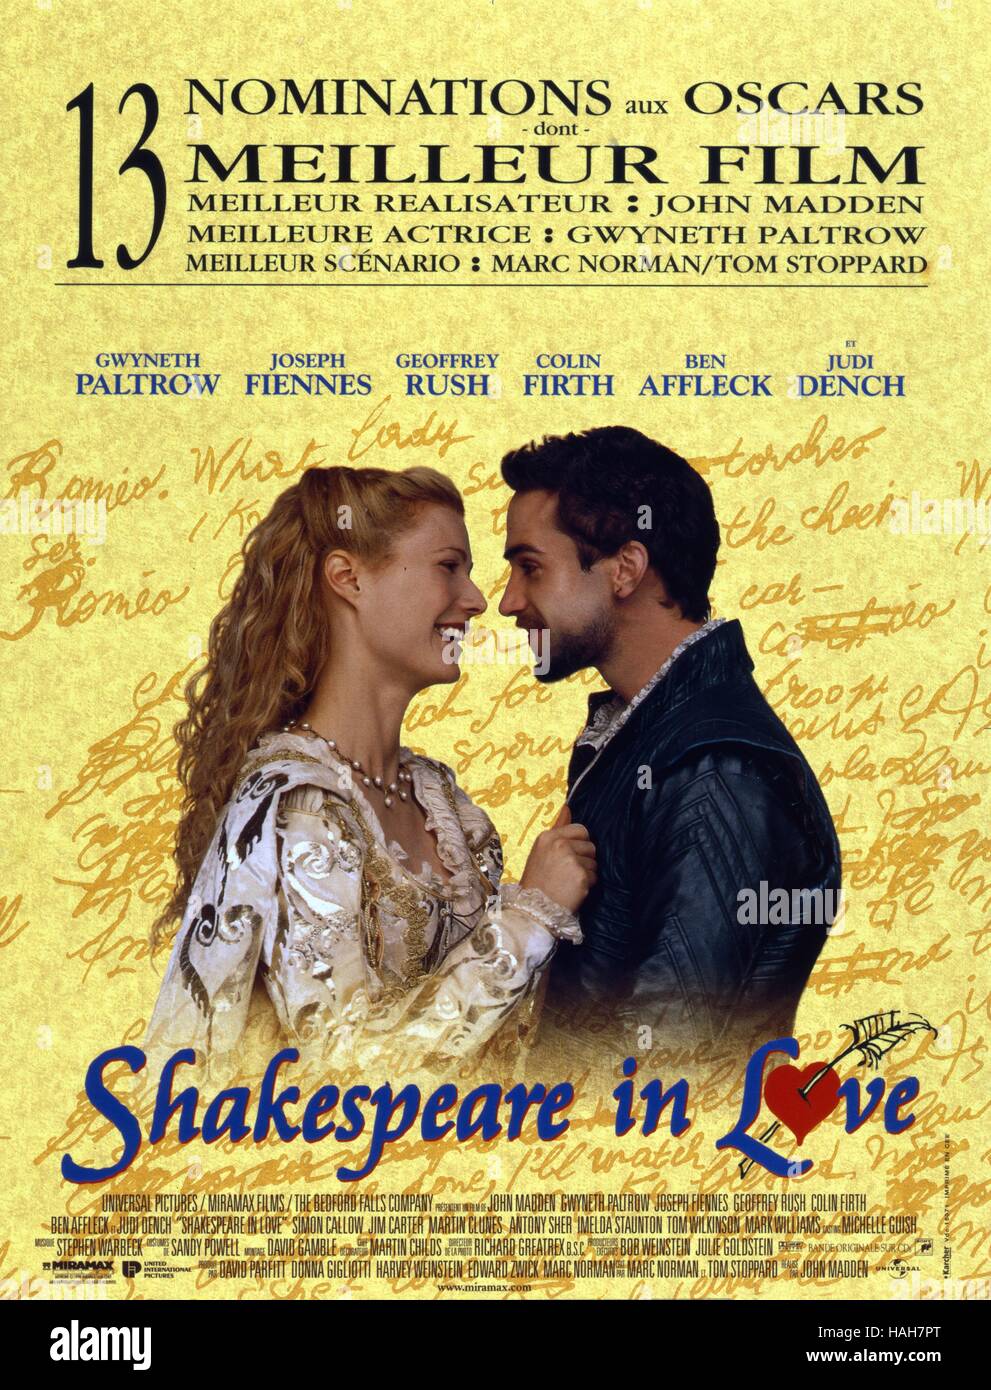 Shakespeare in amore Anno : 1998 USA Director : John Madden Gwyneth Paltrow, Joseph Fiennes poster (Fr) Foto Stock